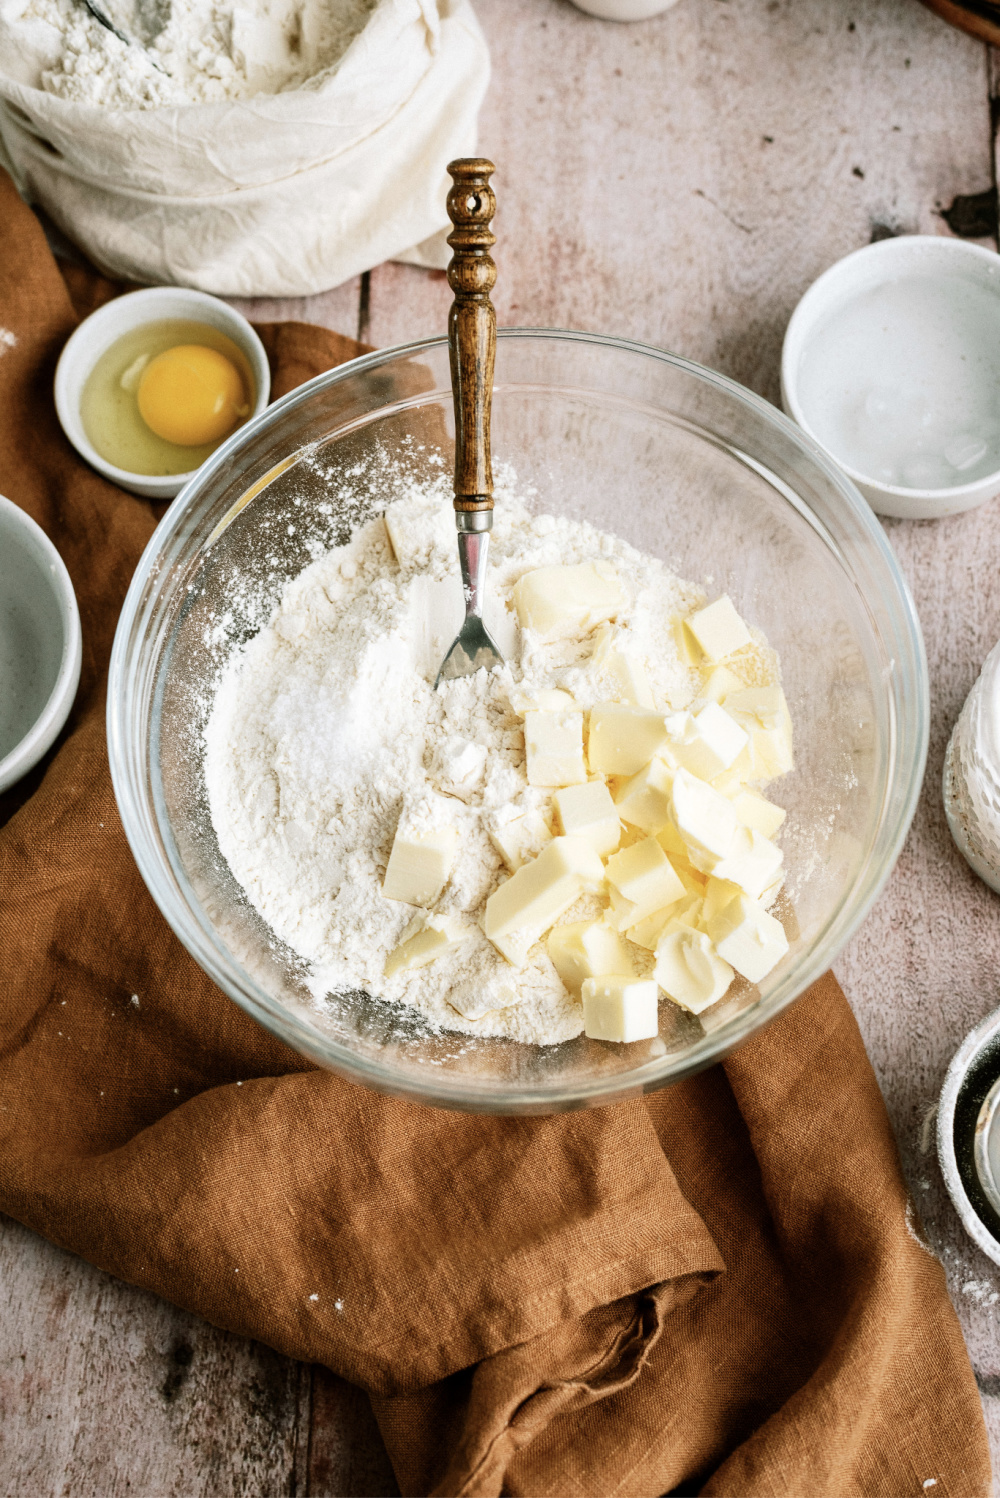 flour and butter together in a bowl to make a pie crust